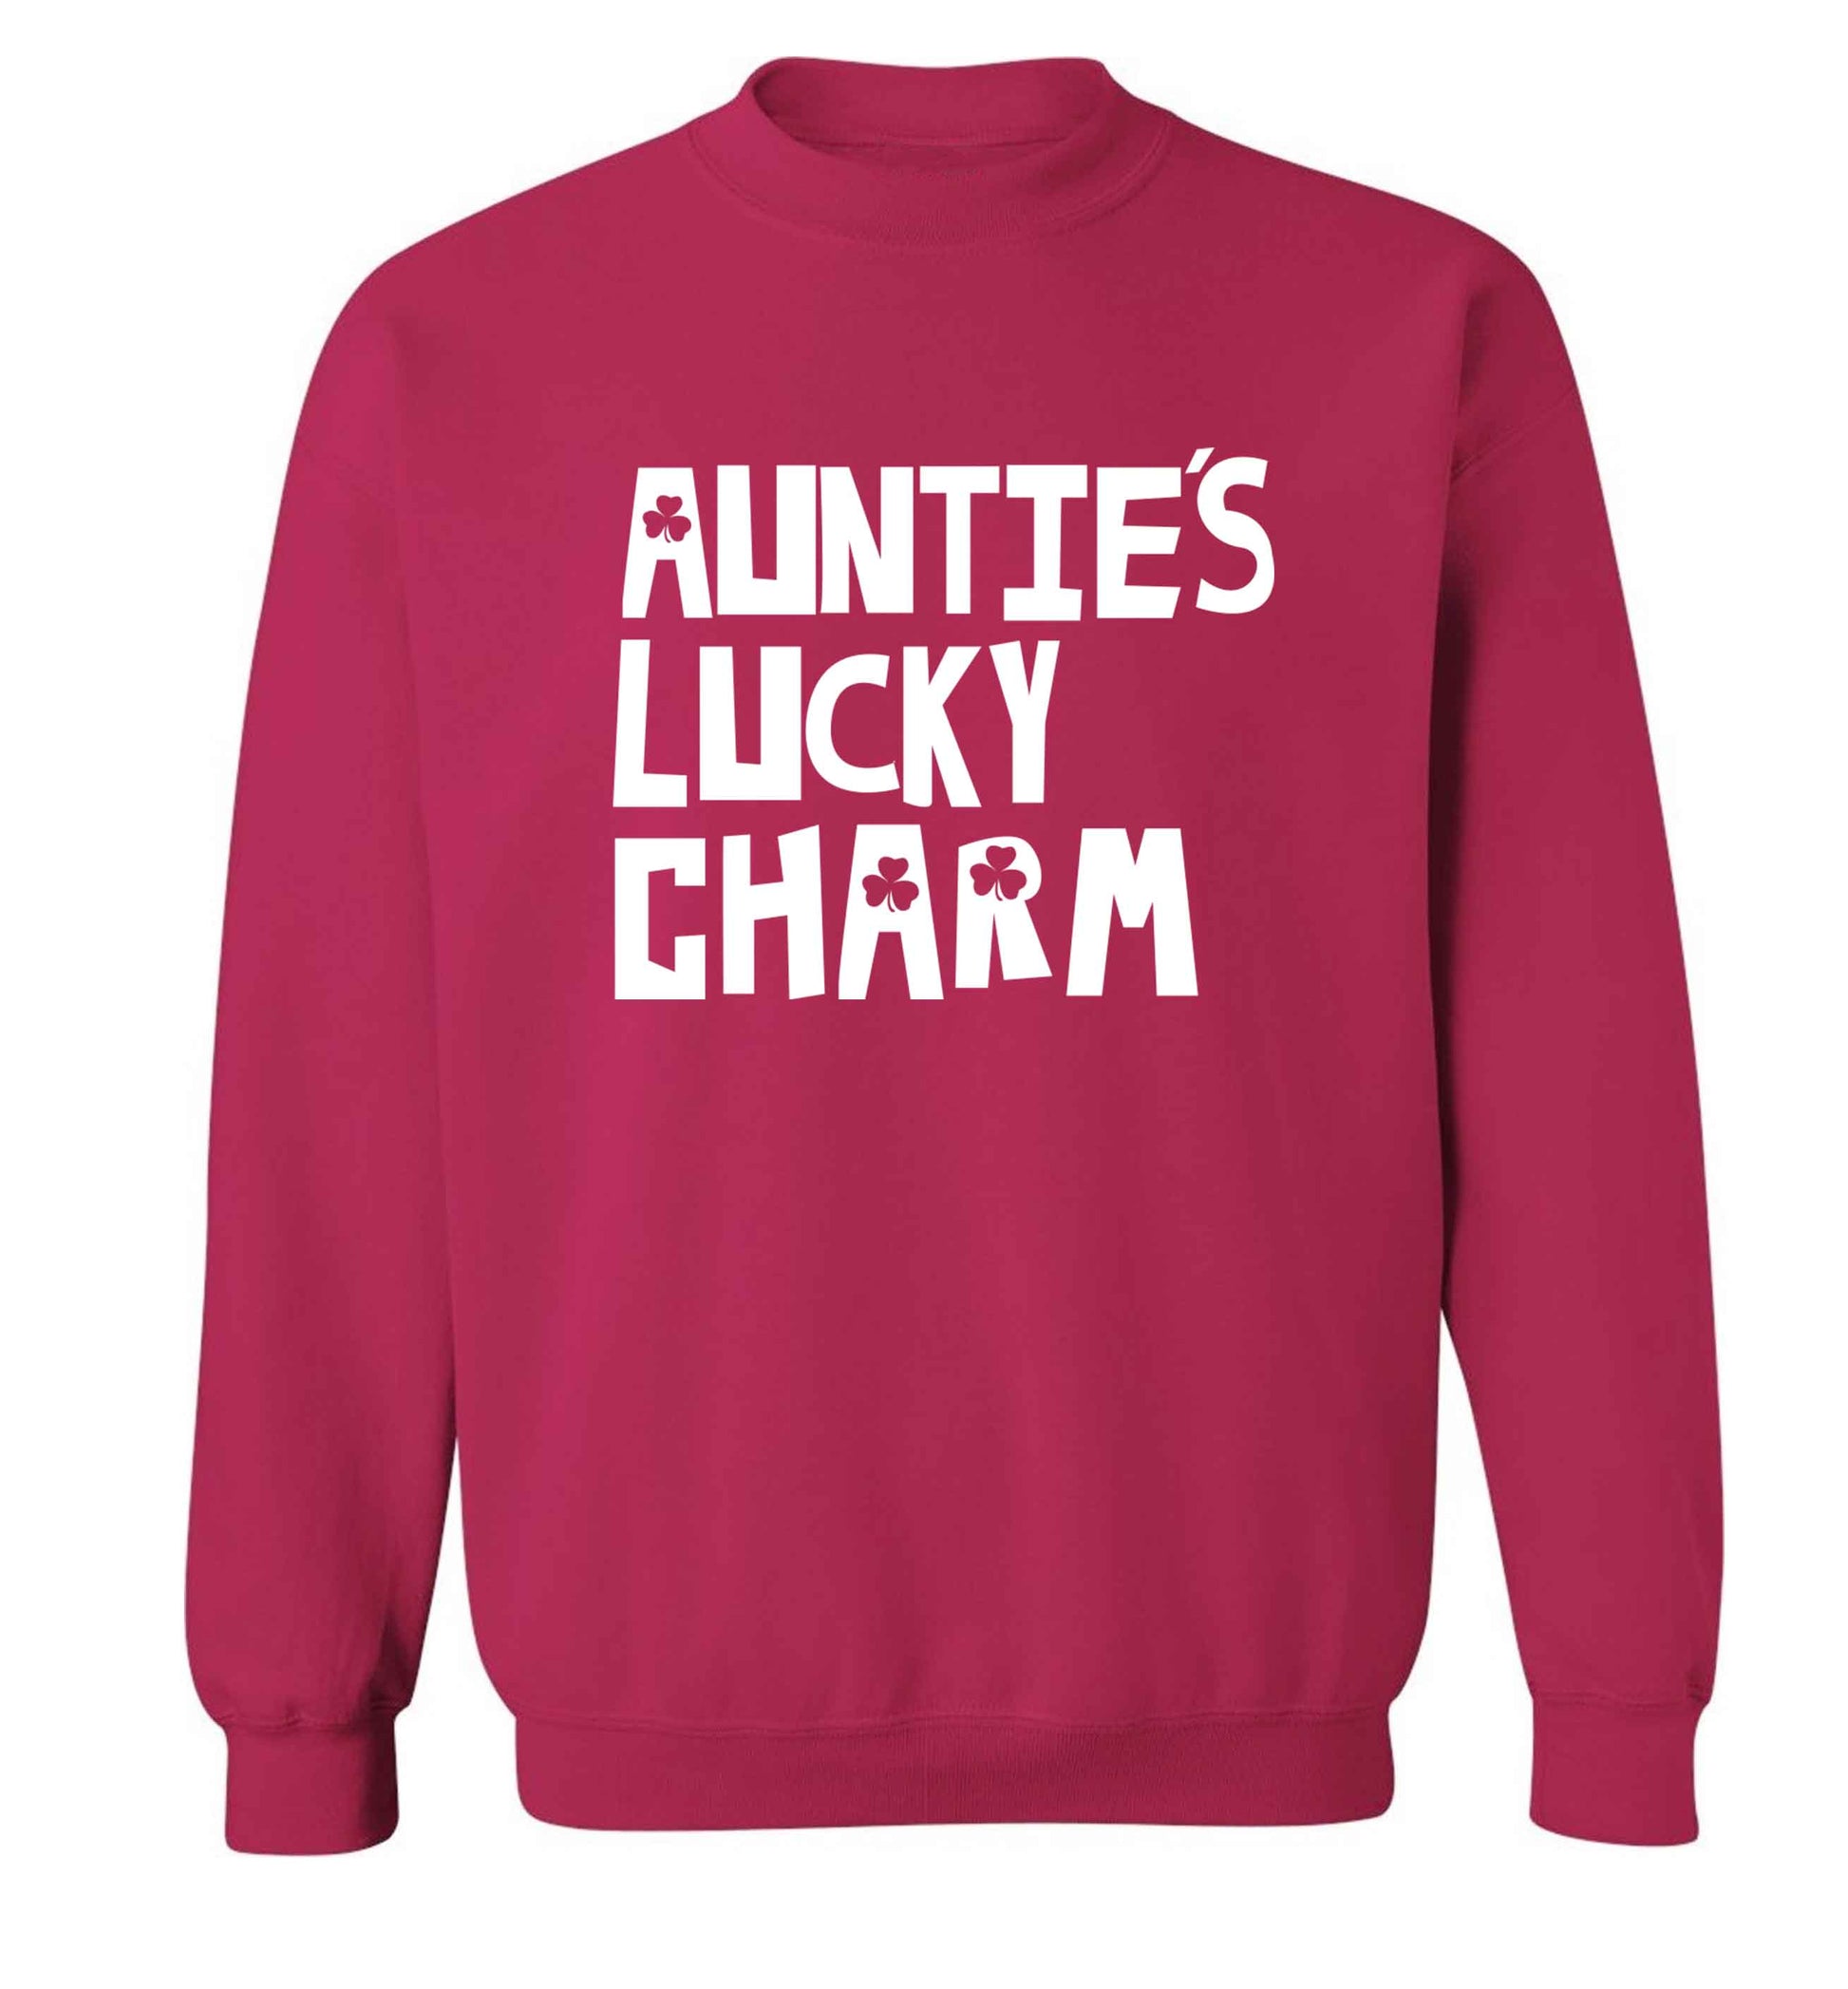 Auntie's lucky charm adult's unisex pink sweater 2XL